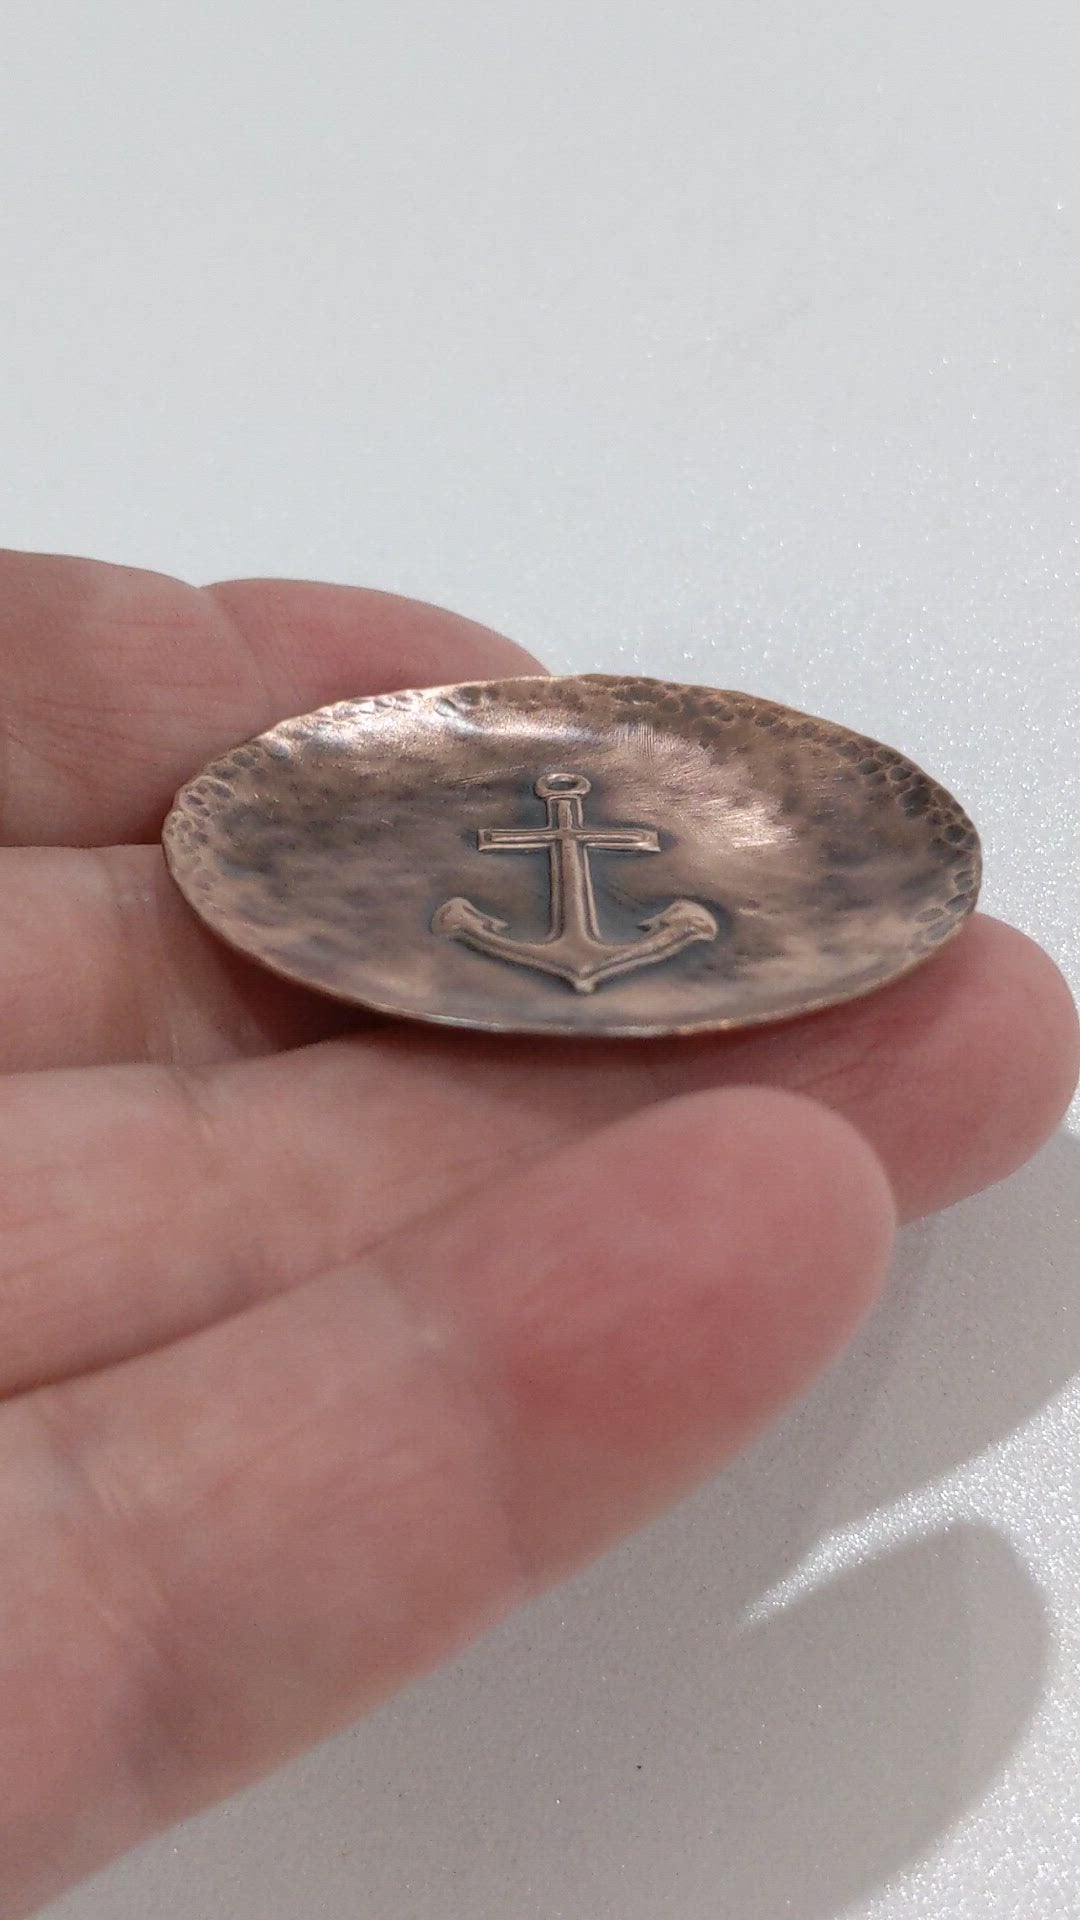 Copper ring or jewelry or trinket dish with a raised impression of a boat anchor. The edged of the dish are curved up slightly, the copper metal has a hammered texture, and the dish is oxidized to enhance the detail.